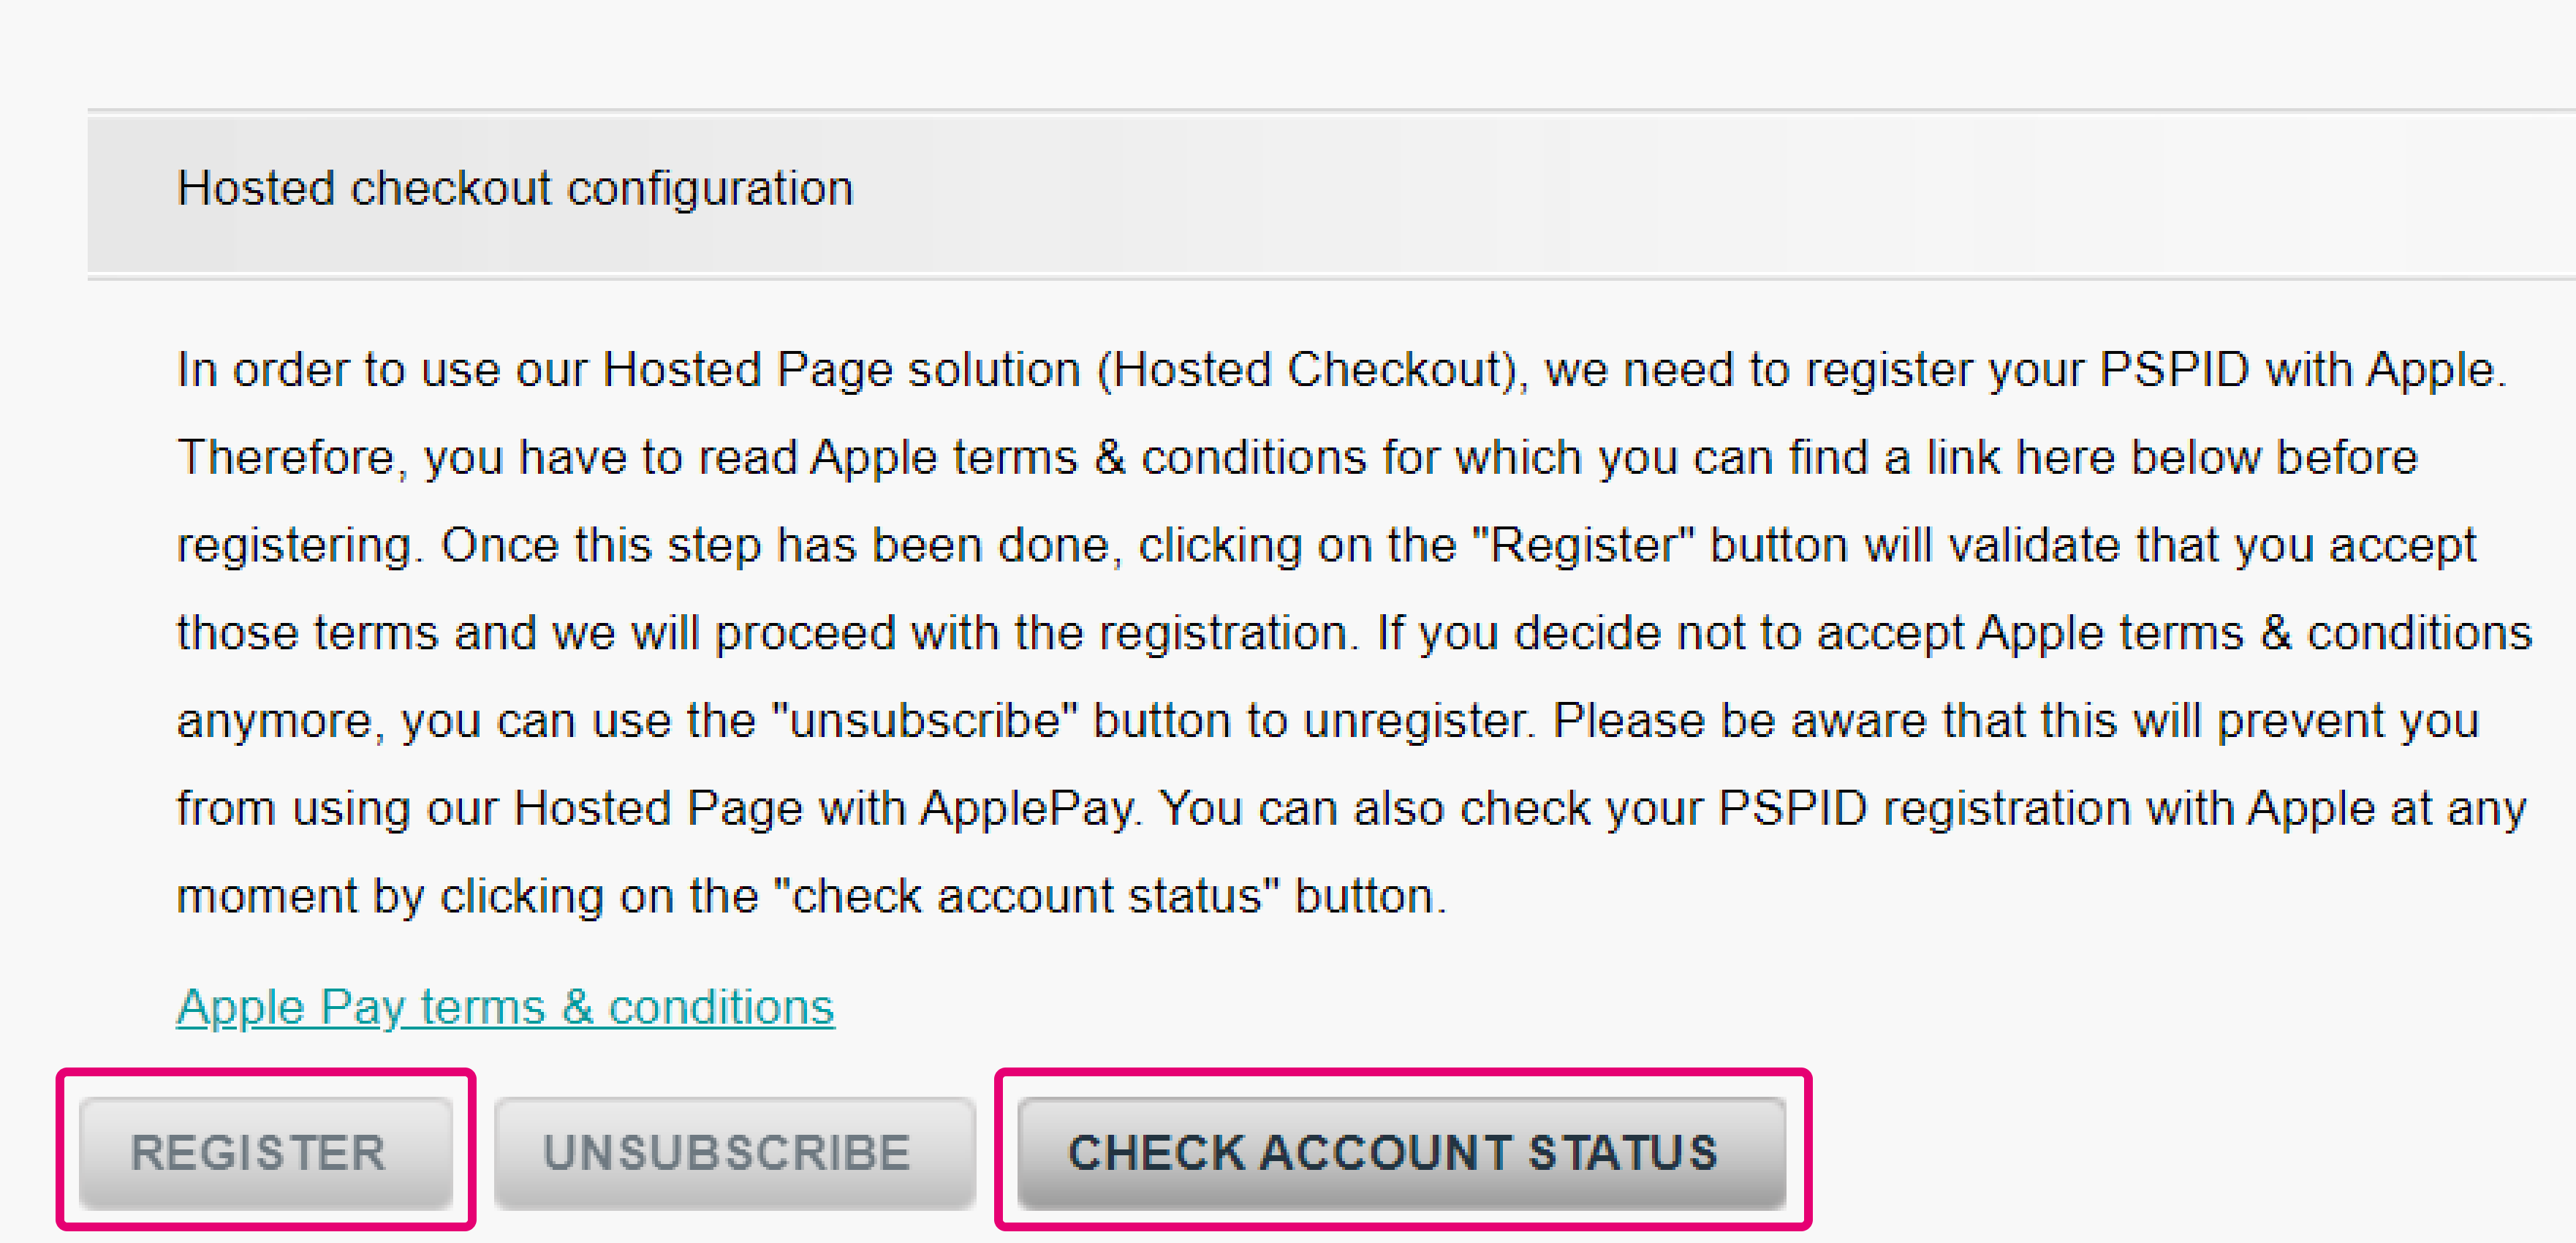 The image above shows how to register and check the account's status in the Back Office.